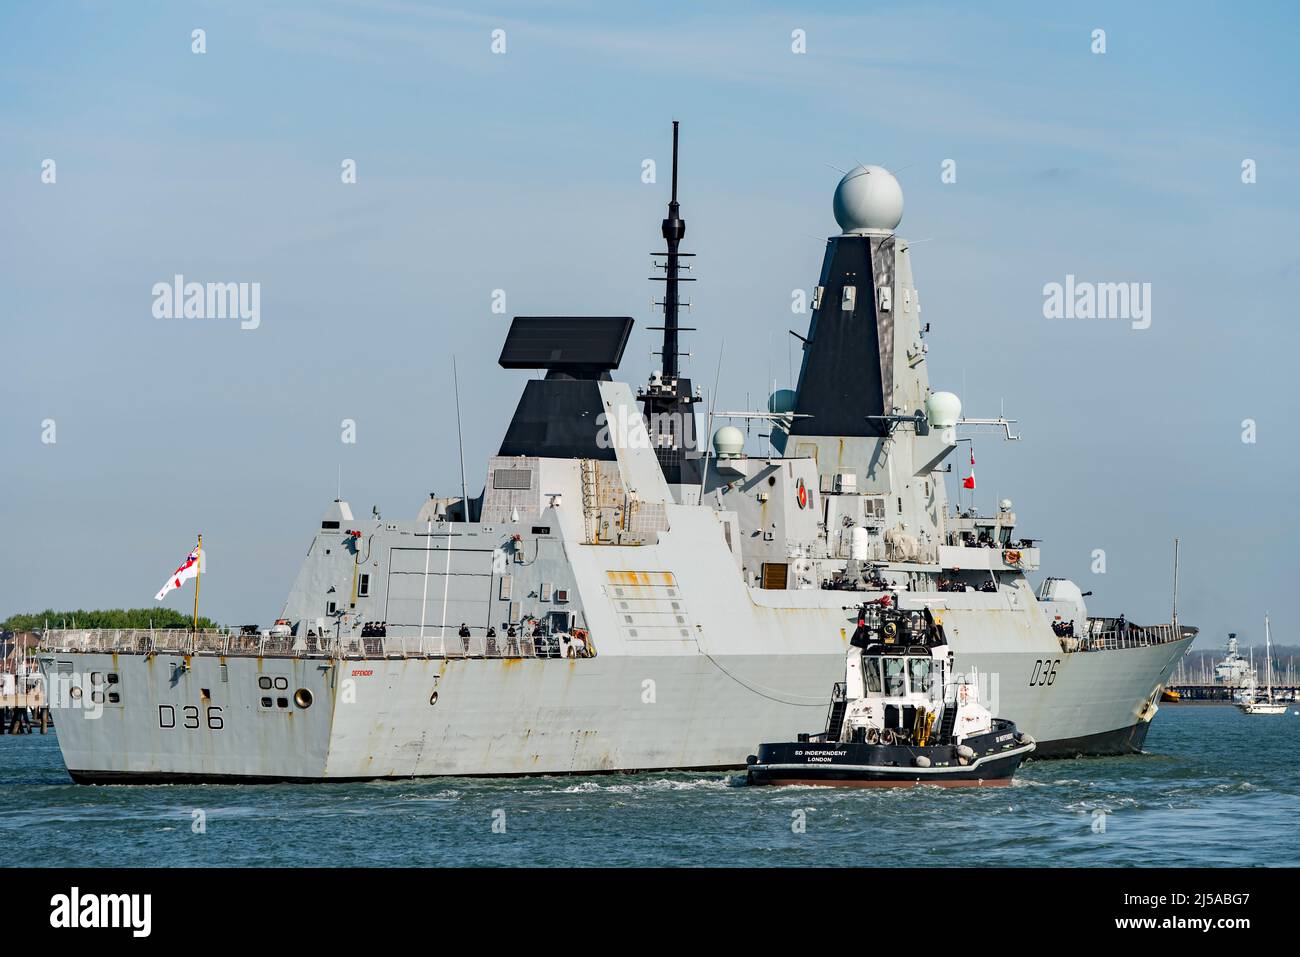 HMS Defender (D36) returned to Portsmouth, UK on the 19th April 2022. Seen with the escorting tug SD Independent alongside. Stock Photo